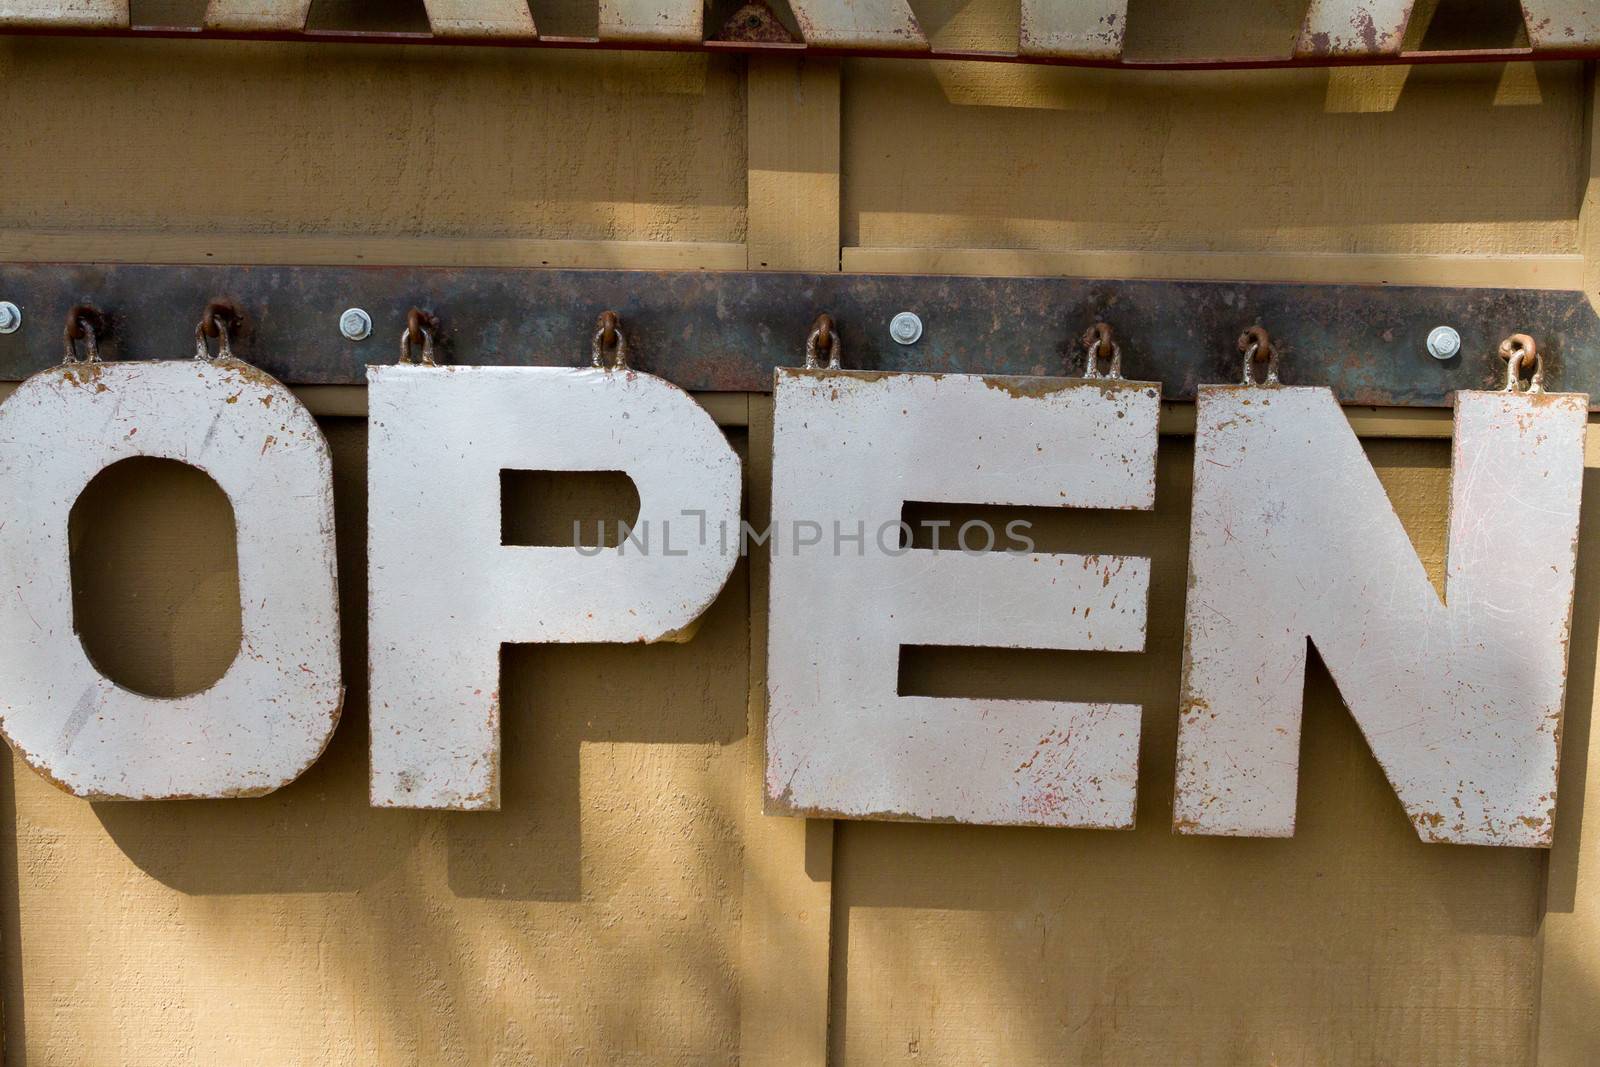 Open Sign at Restaurant by joshuaraineyphotography